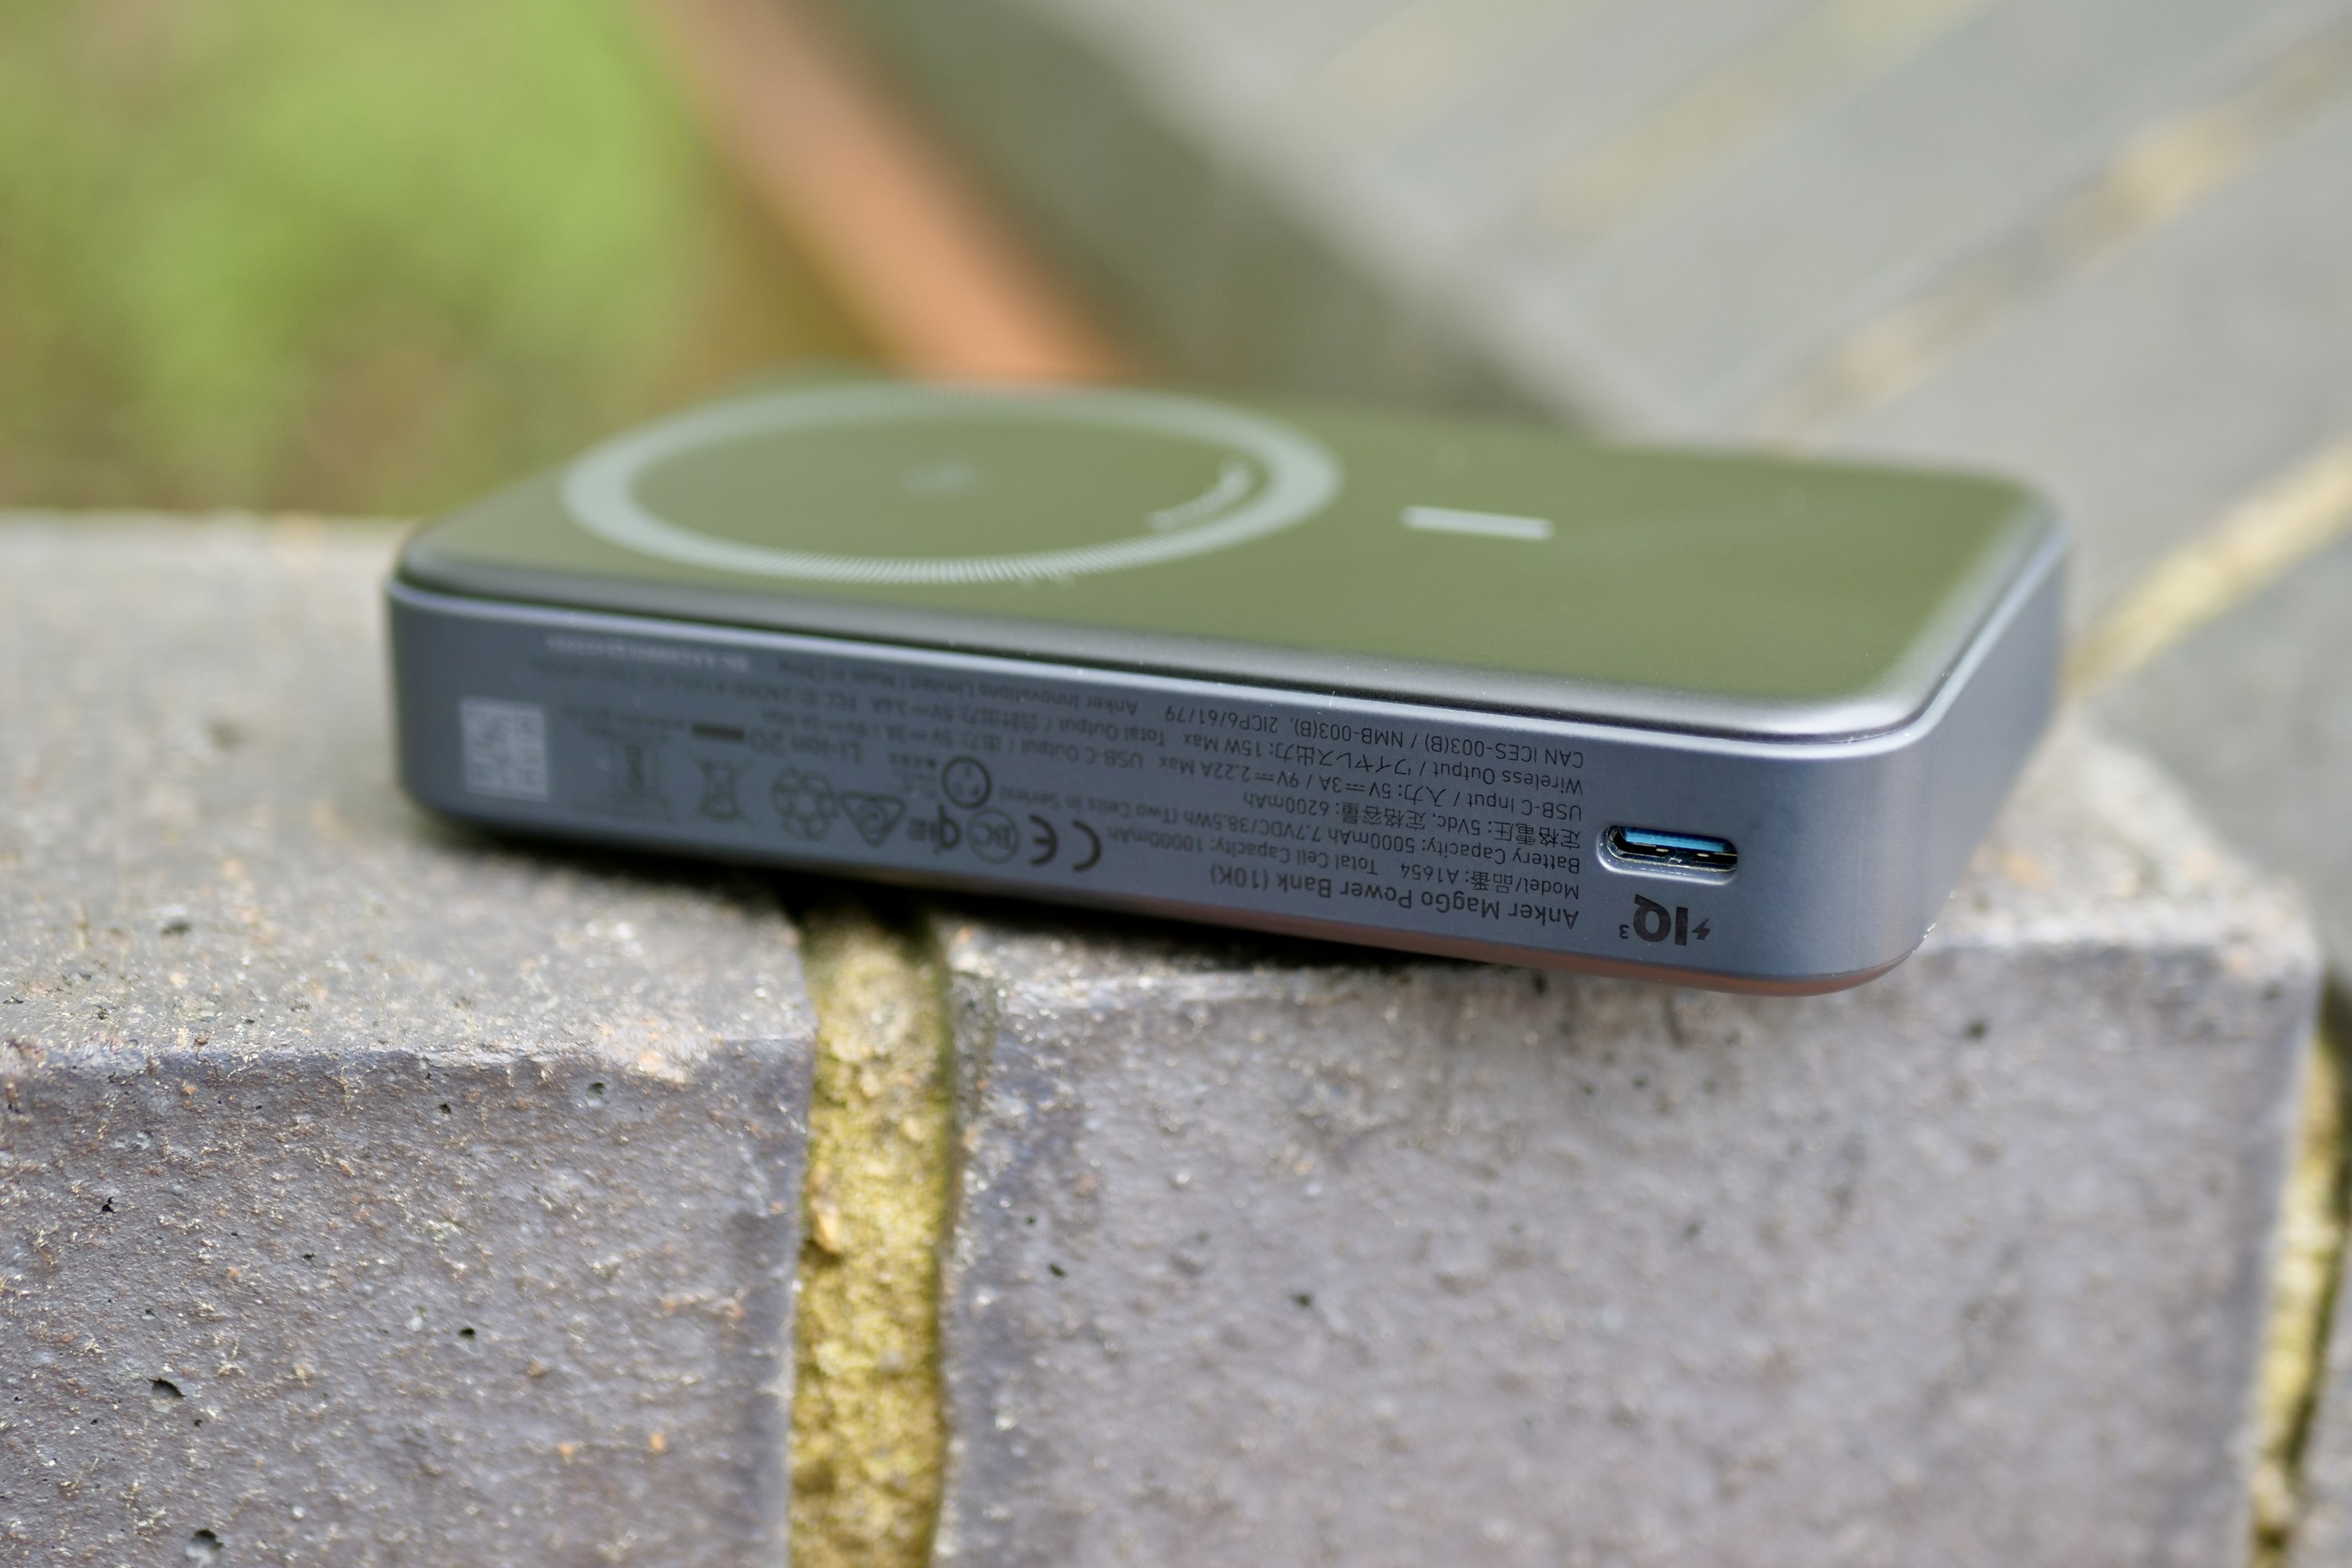 The side of the Anker MagGo Power Bank.